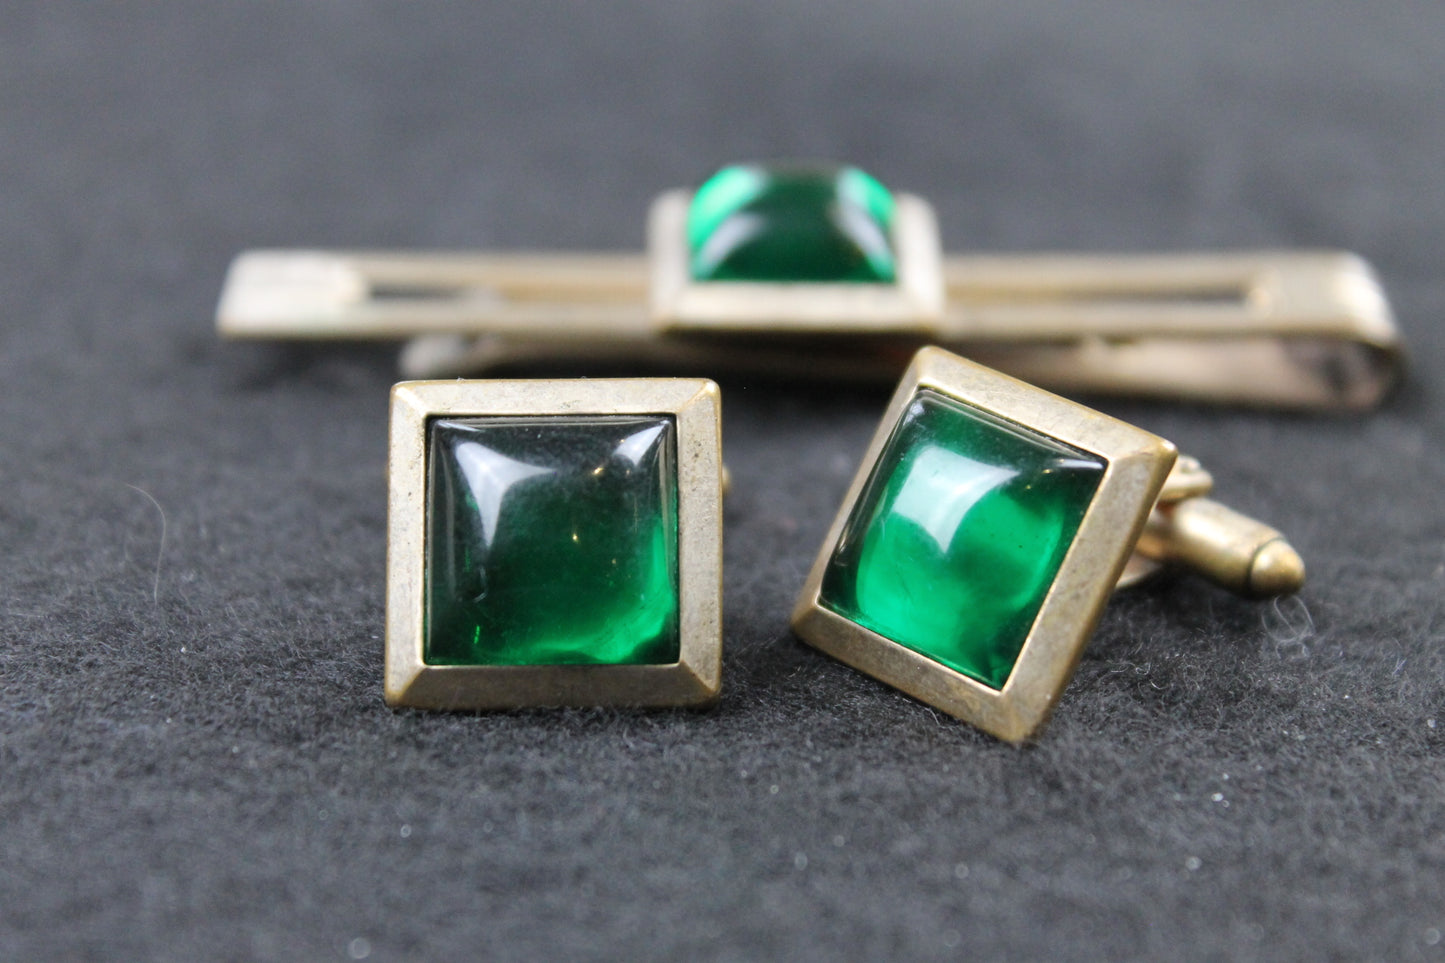 Vintage Green Square Lucite Stone Cufflinks and Tie Clip Set